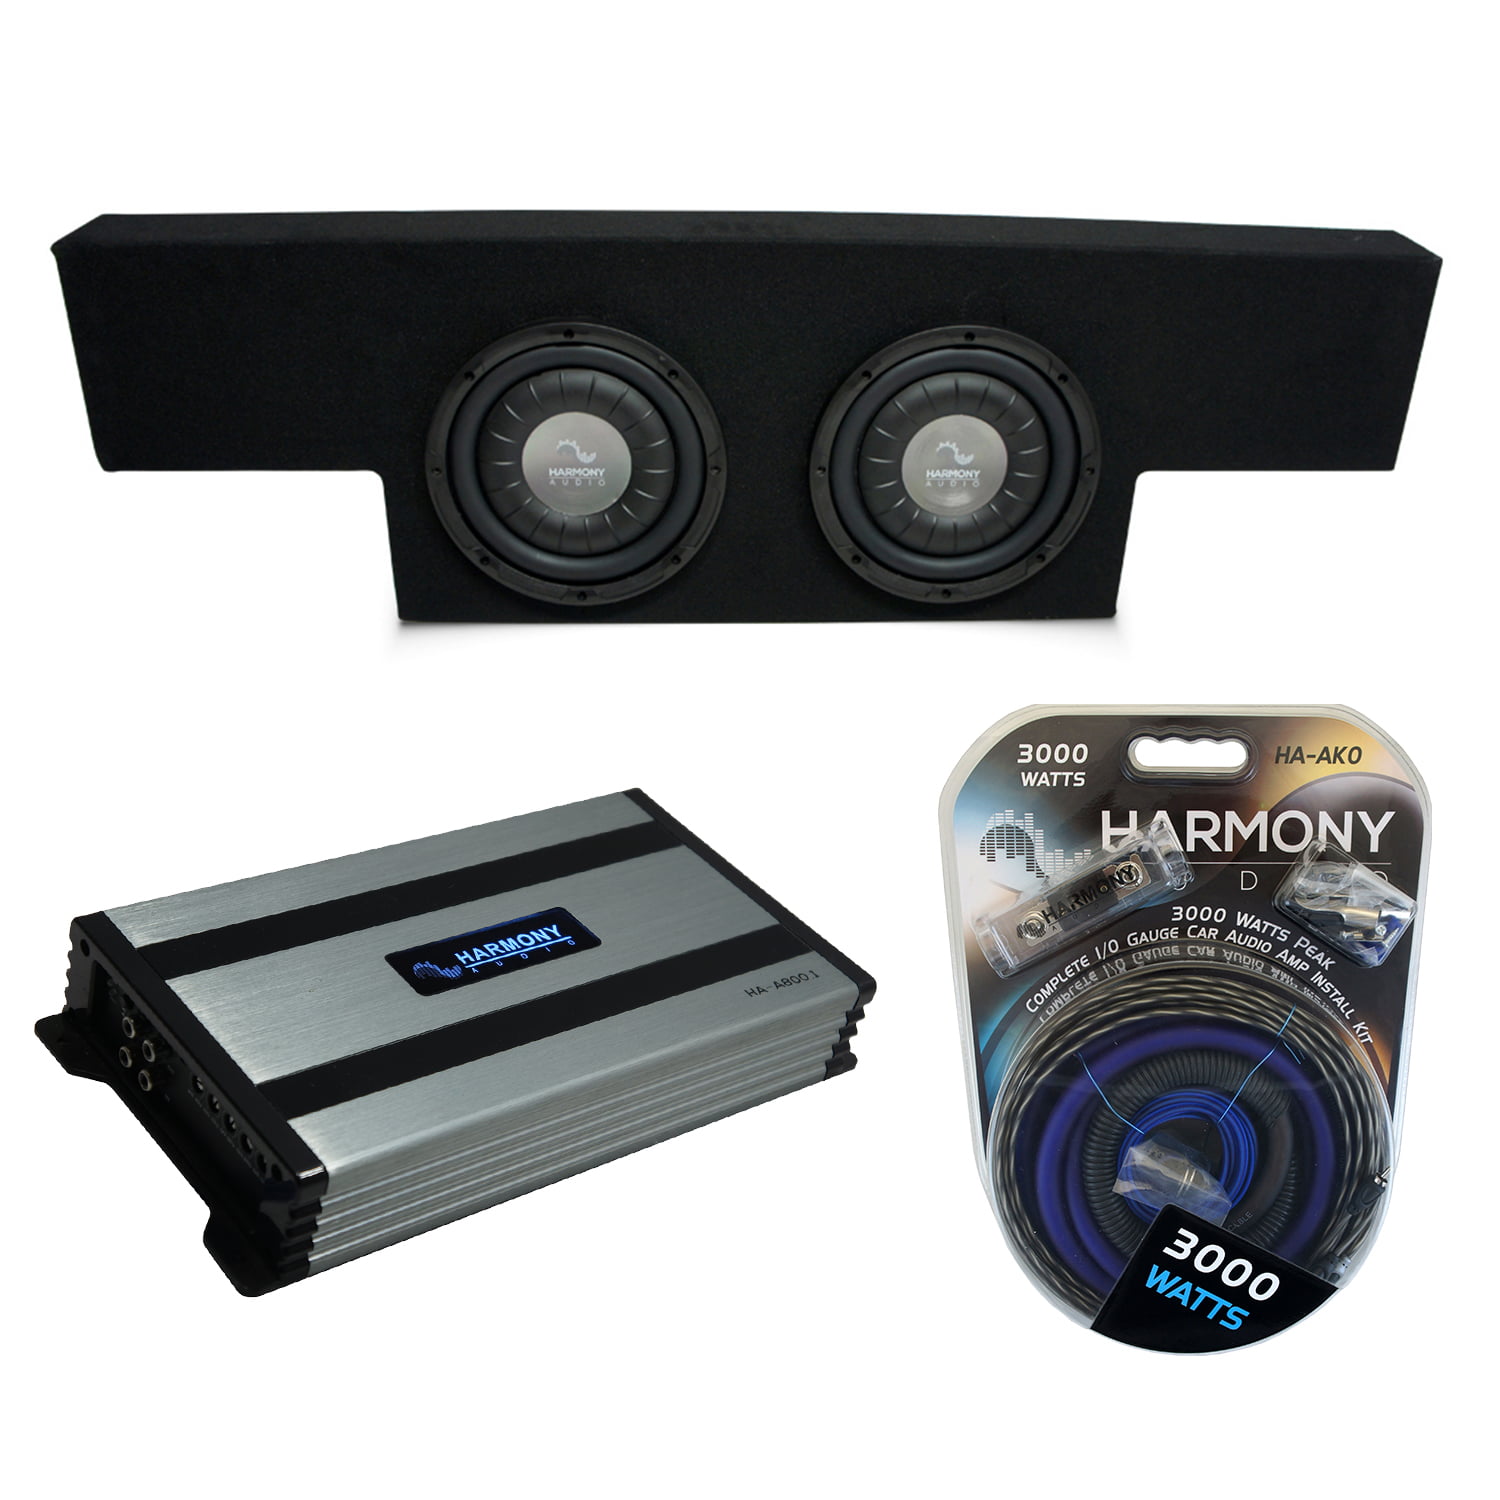 2 Harmony Audio HA-R124 Subwoofer Dual 12 Sub Box Bundle with Harmony Audio HA-A400.1 Amp Compatible with 01-06 GMC Sierra Non-HD Crew Cab Truck 